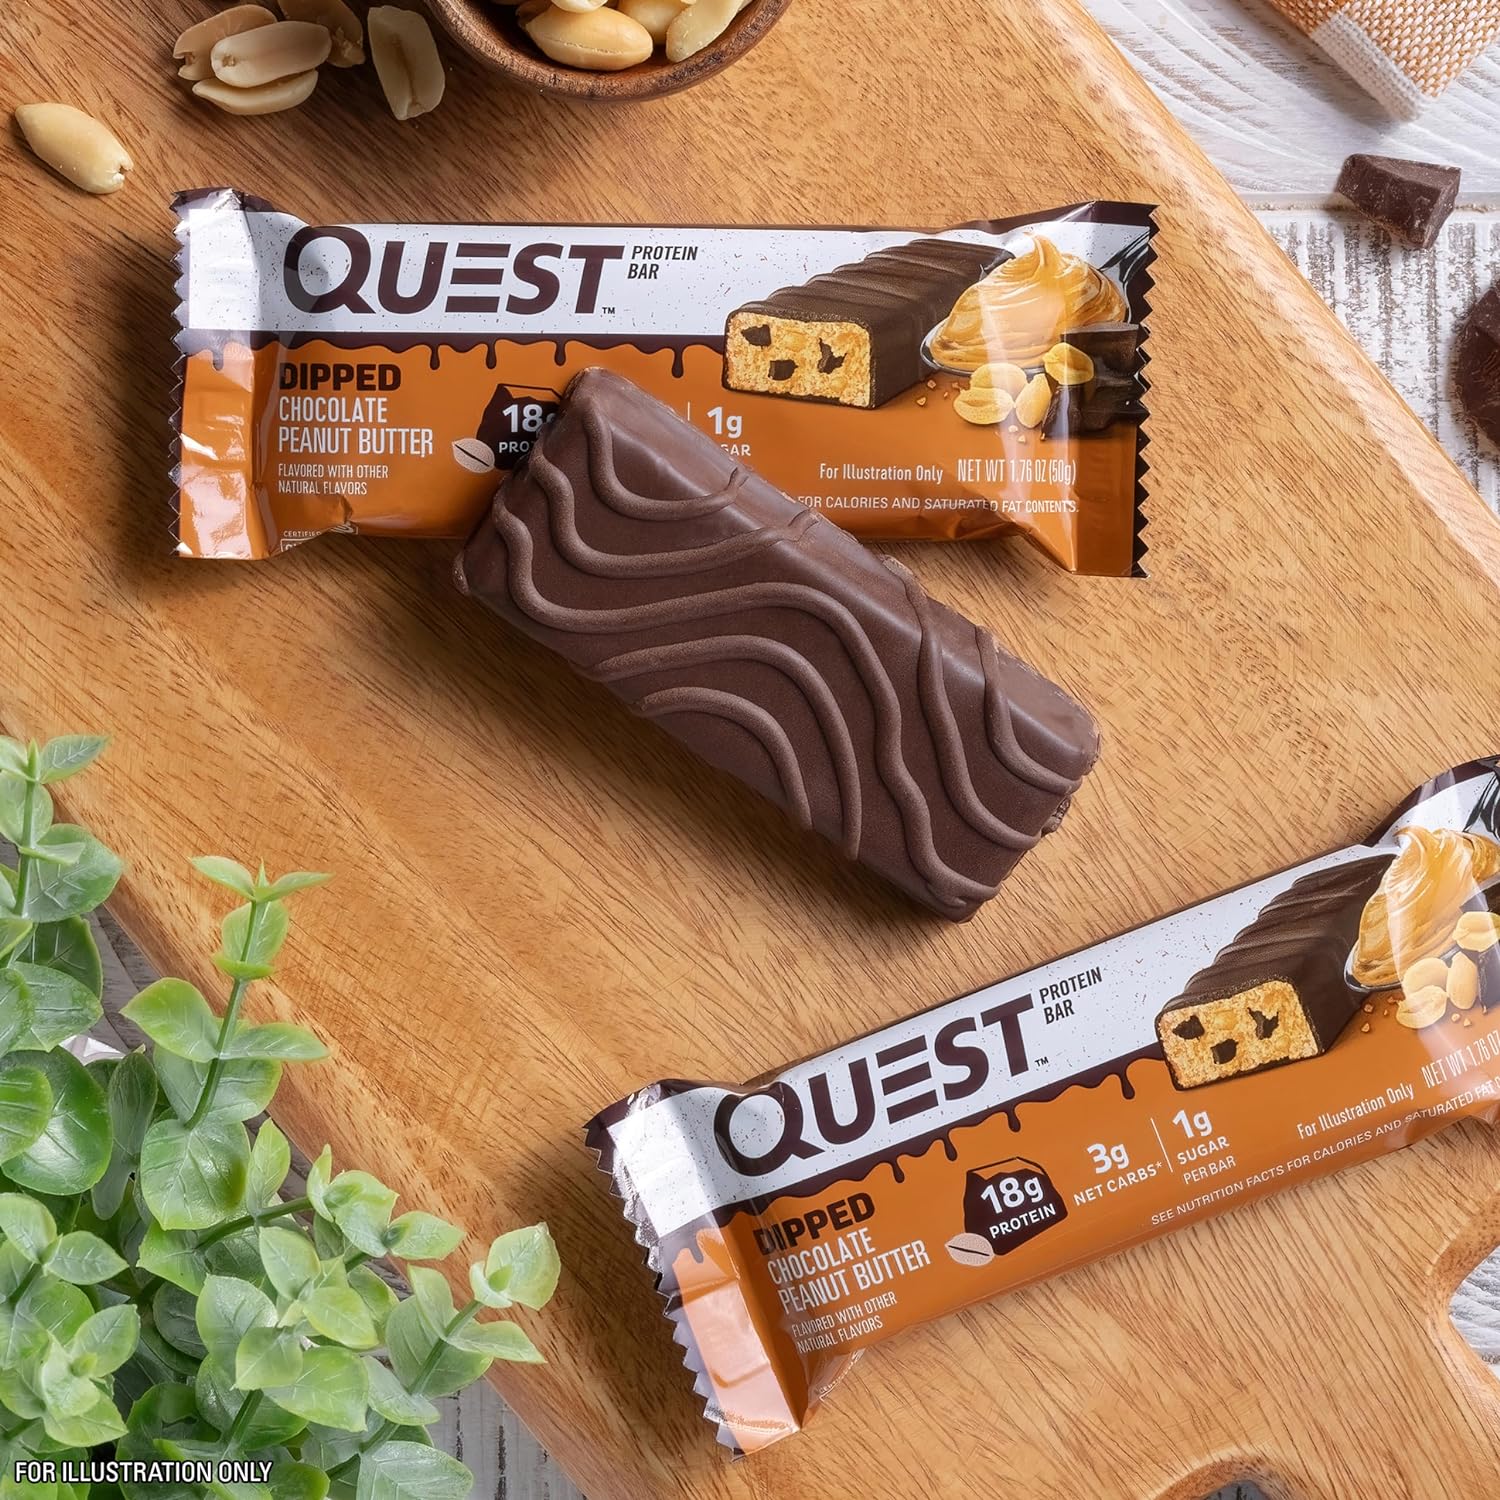 Quest Nutrition Dipped Chocolate Peanut Butter Protein Bars, 18g Protein, 1g Sugar, 3g Net Carbs, Gluten Free, 12 Count